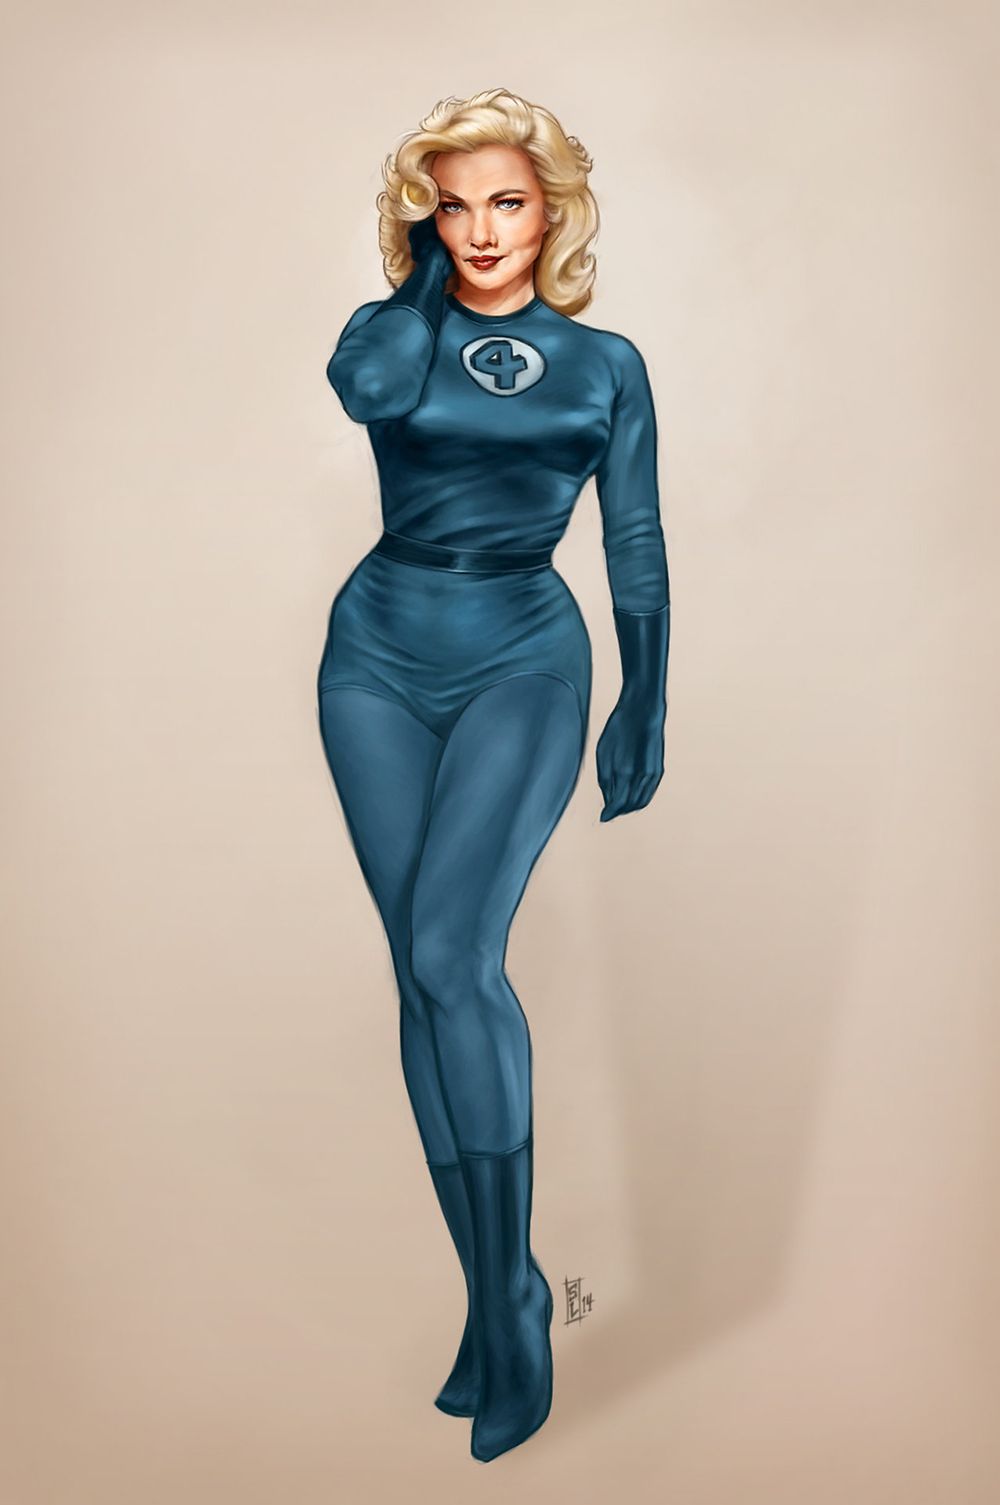 Sue Storm Pin-Up